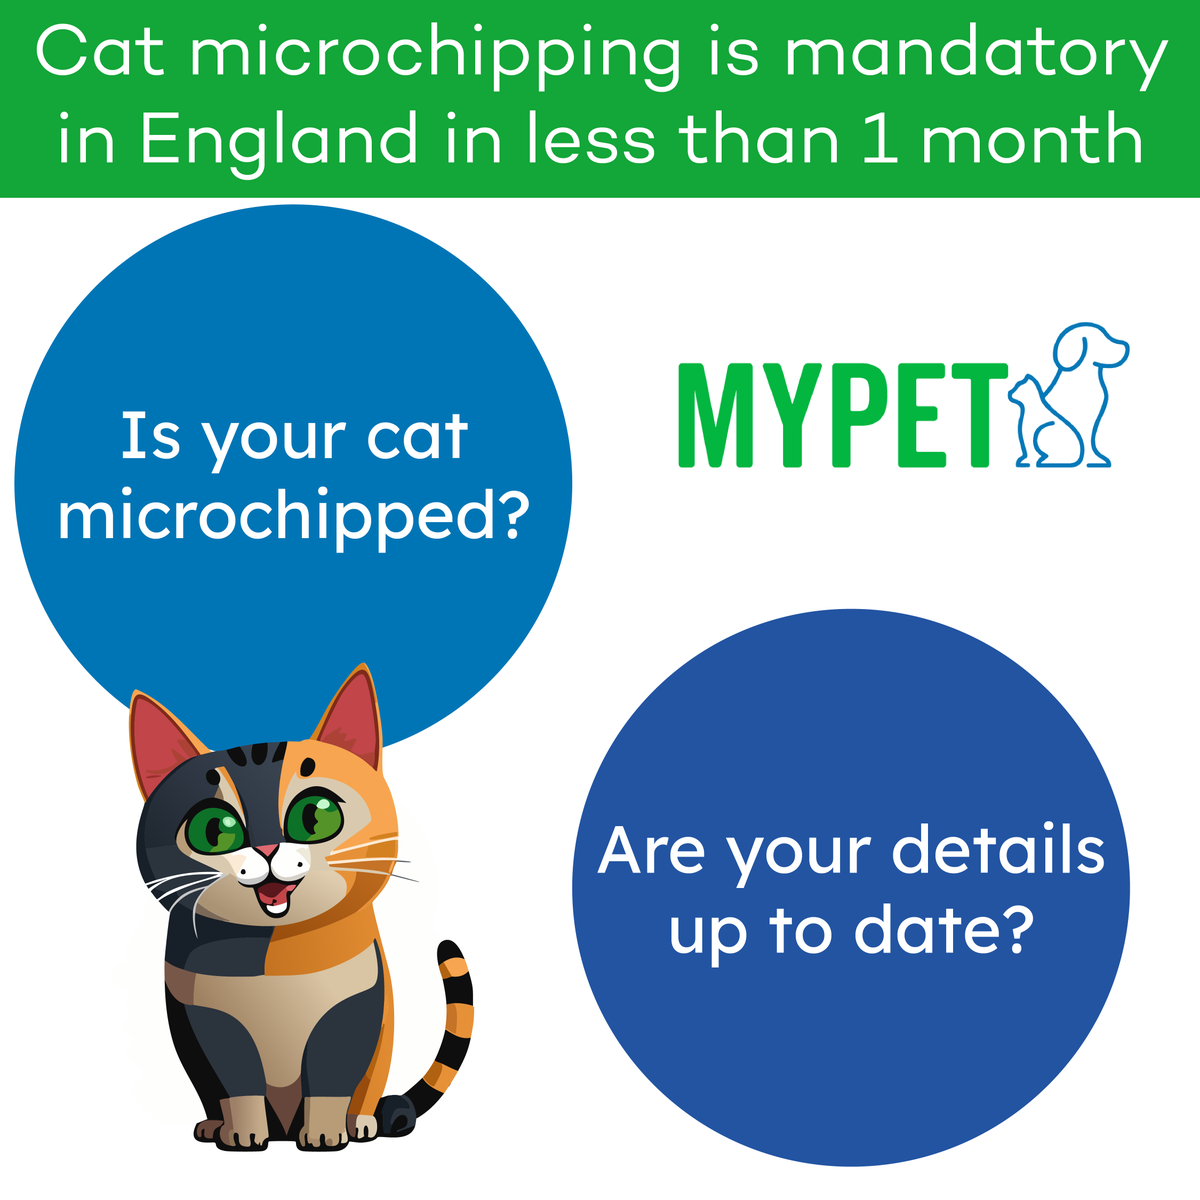 It will be mandatory on 10th June for cats to be microchipped. Is your cat microchipped? Is your cat's microchip registered?

If you're not sure you can search your pet's microchip here to check if they are registered: hubs.la/Q02xGy0h0

#protectyourpet #catmicrochipping